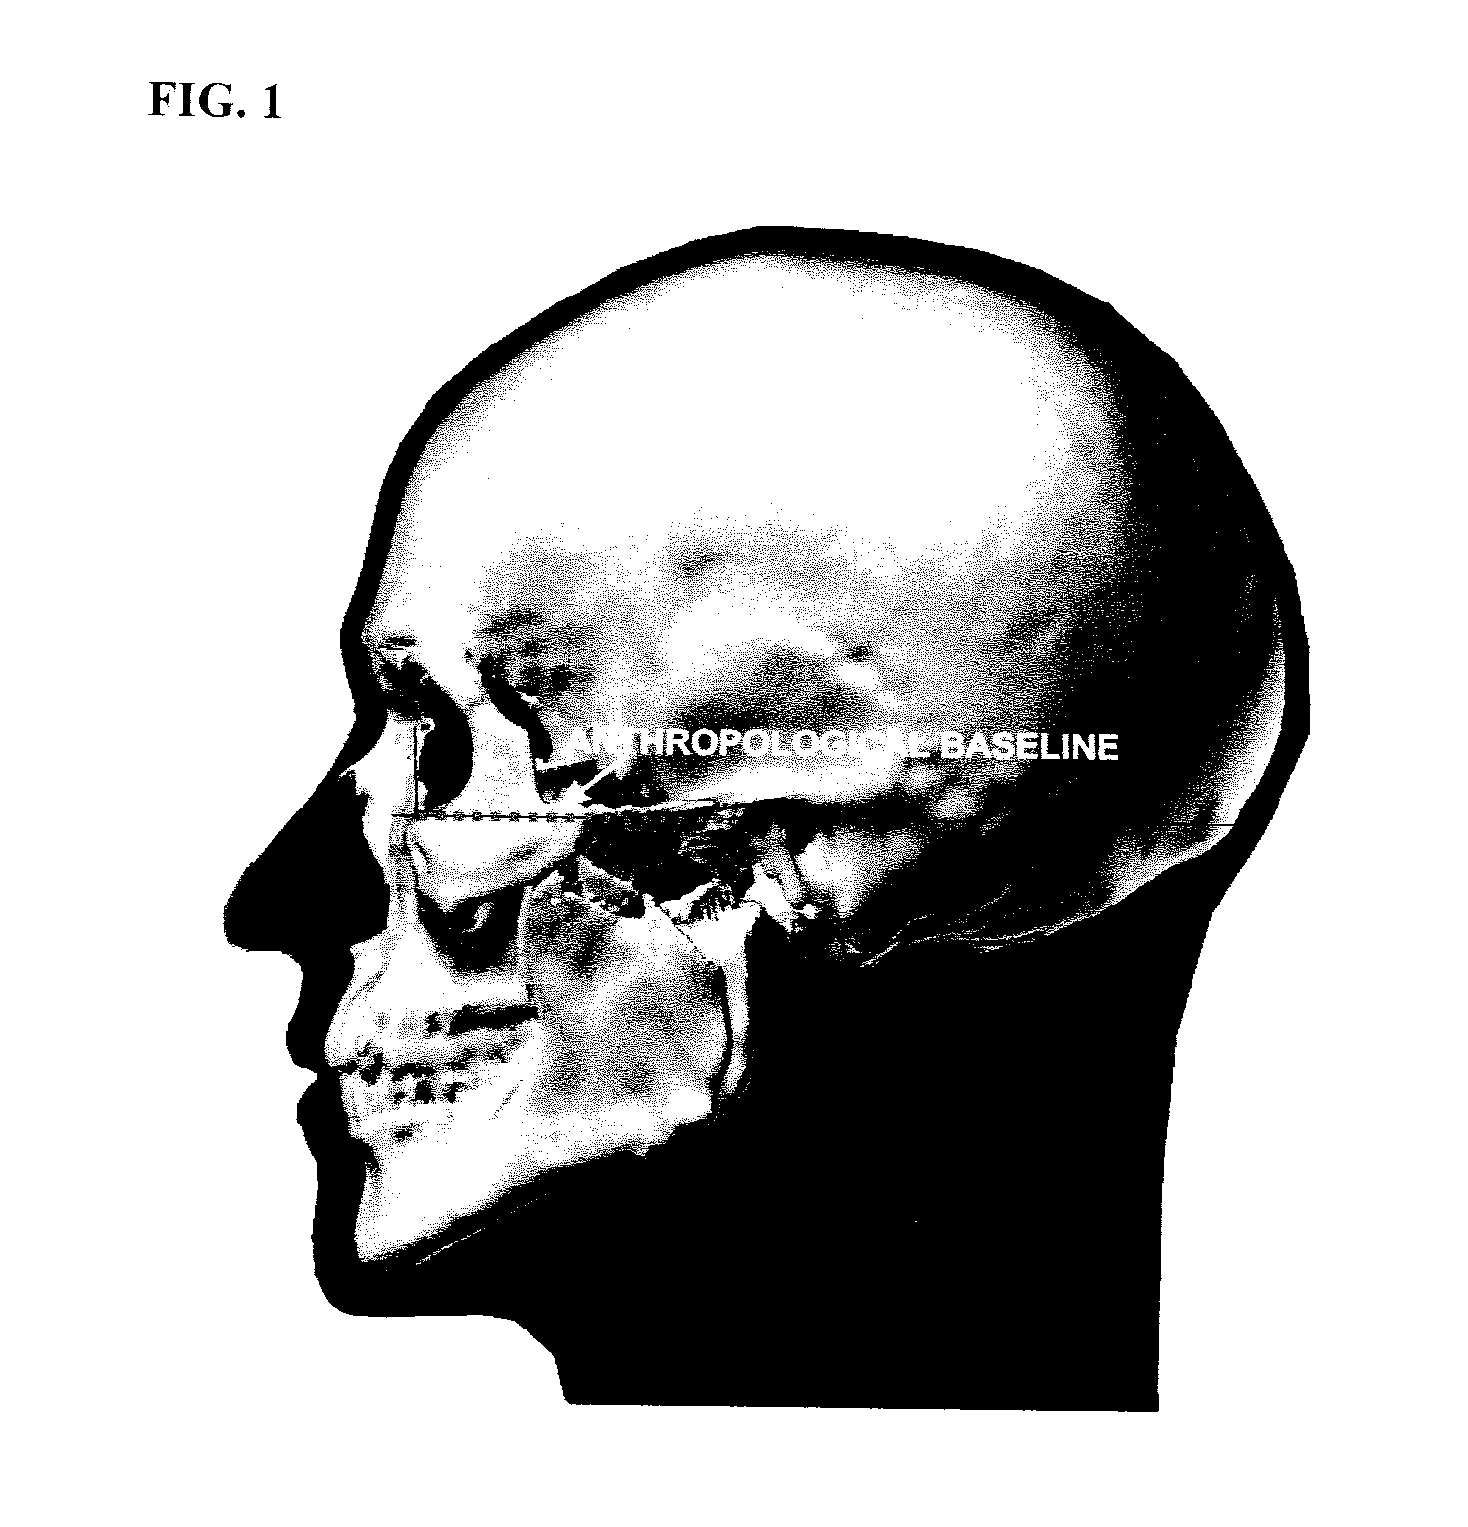 Method and apparatus for unambiguously determining orientation of a human head in 3D geometric modeling